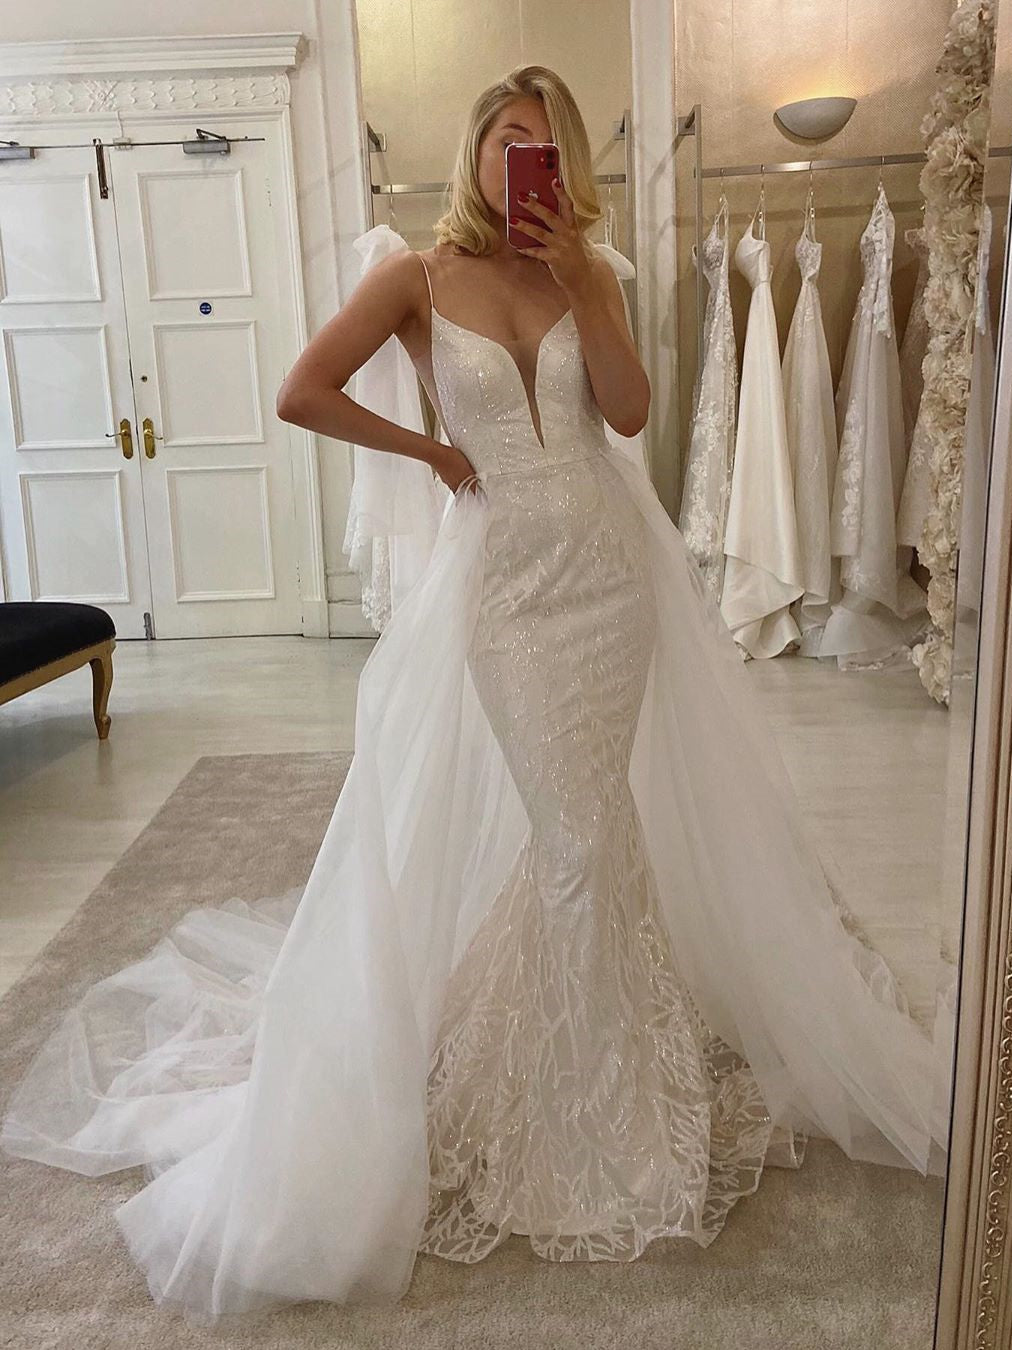 2 Pieces Spaghetti Long Mermaid Sequin lace Wedding Dresses, 2020 Newest Wedding Dresses, Bridal Gown